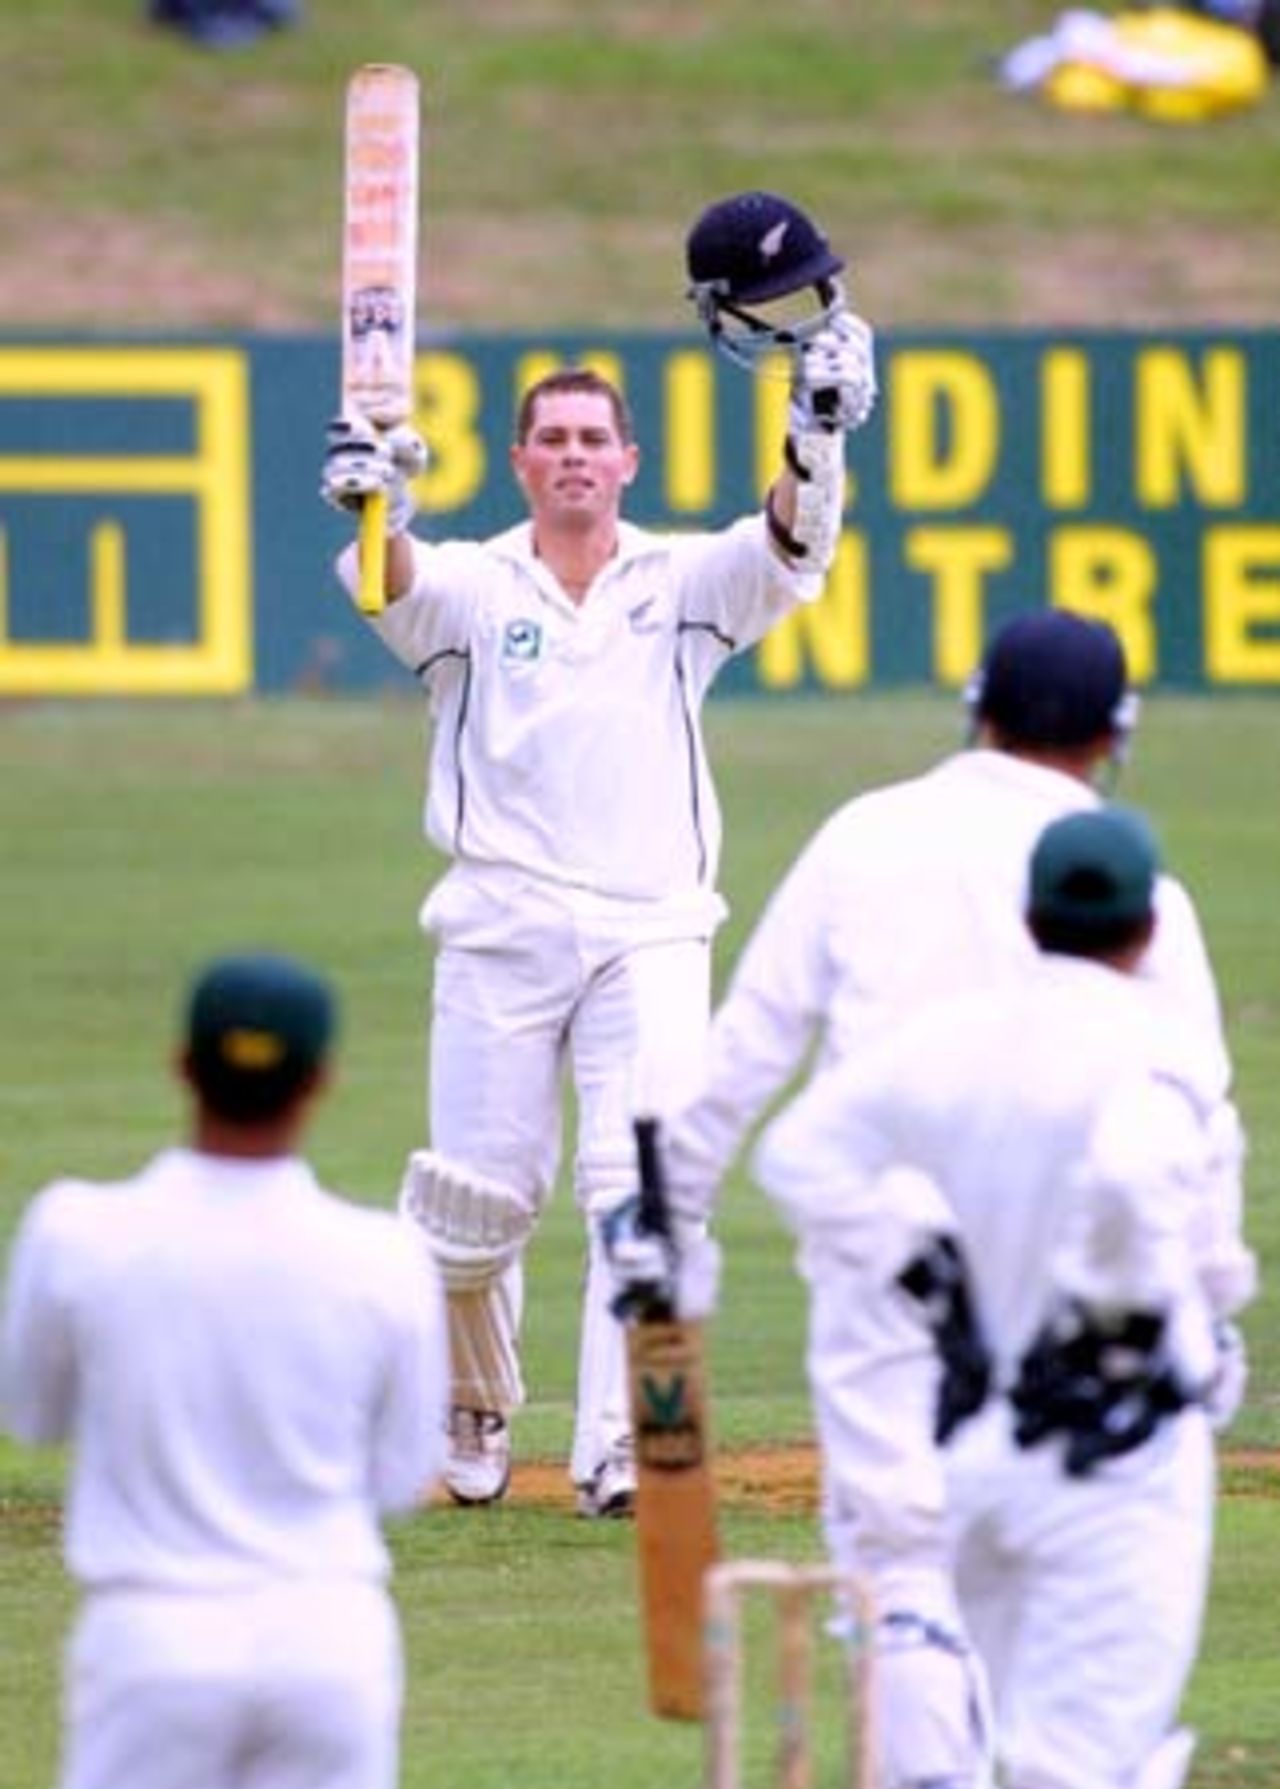 New Zealand opening batsman Matthew Bell raises his bat and helmet in celebration of reaching his maiden Test century. Bell went on to score 105 in the first innings. 3rd Test: New Zealand v Pakistan at WestpacTrust Park, Hamilton, 27-31 March 2001 (Day 3).